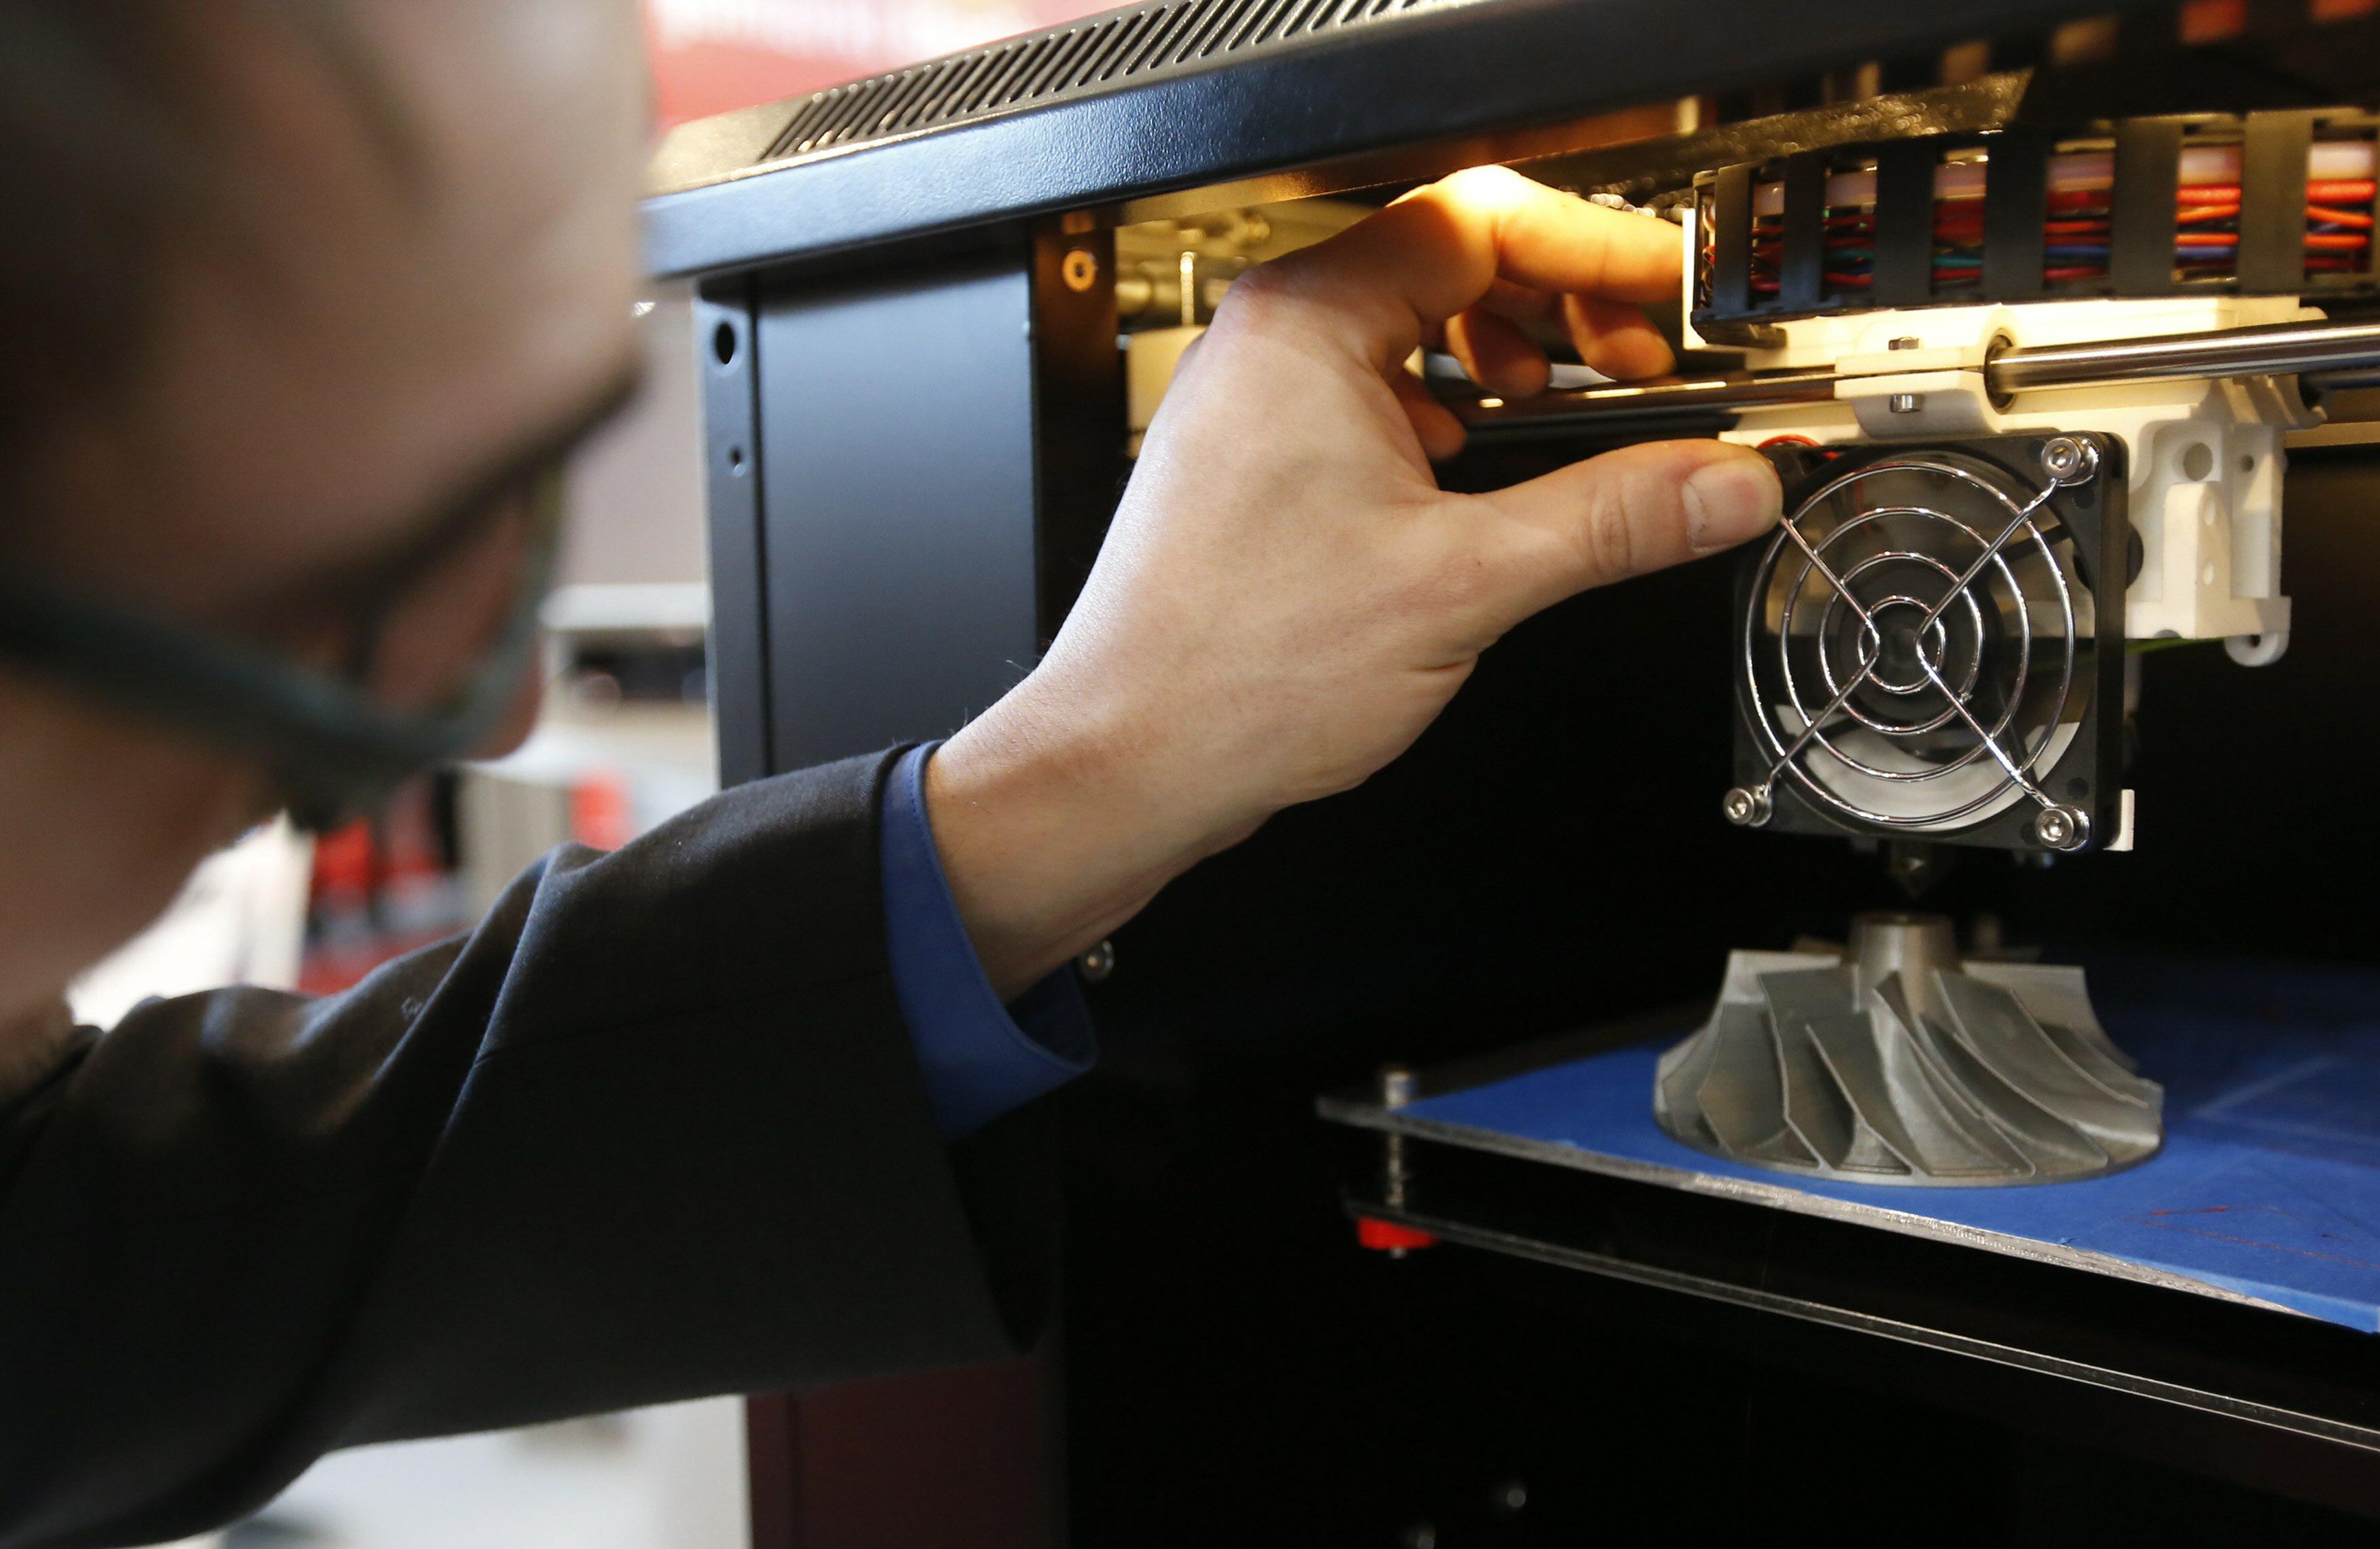 3-D printers aren't just for hobbyists